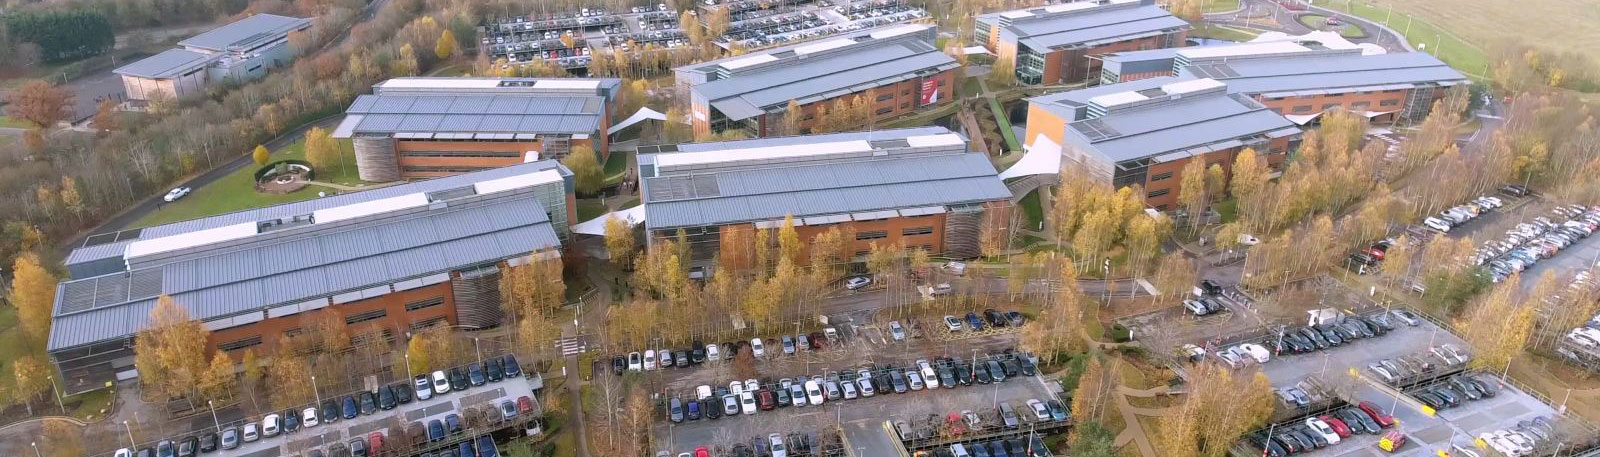 Aerial view of 7 large office blocks and attached car parks